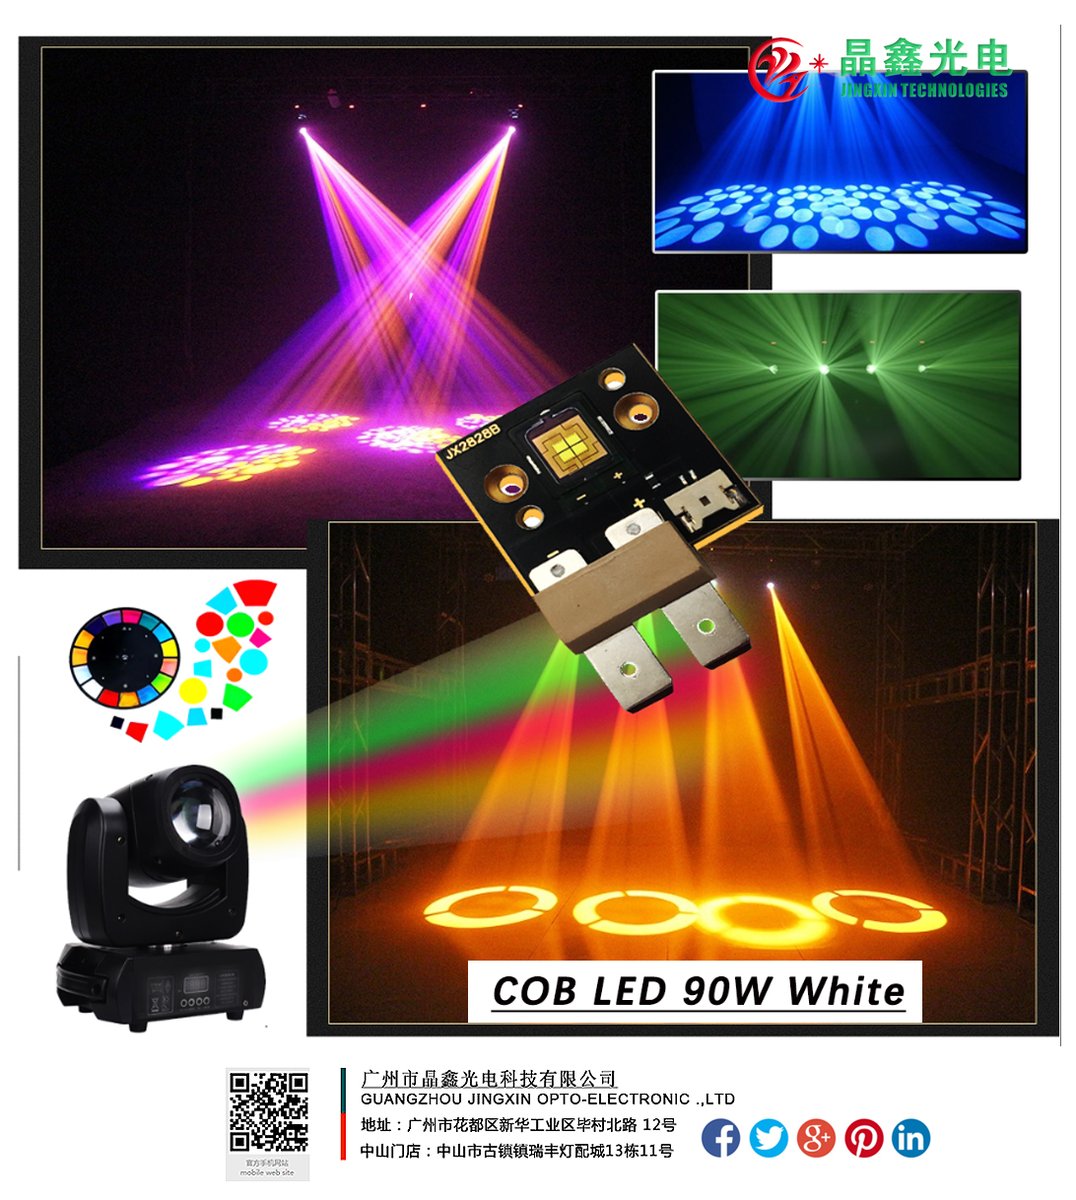 here is for 90w #COBLED many customer use it on Pattern lamp . and effections water design light . it keeps the highest brightness . #stagelight #lightingsolutions #lightingdesign
#lightingdesigner #ledlighting #ledlights #ledlight #ledlightingsolutions #ledlightingsystems